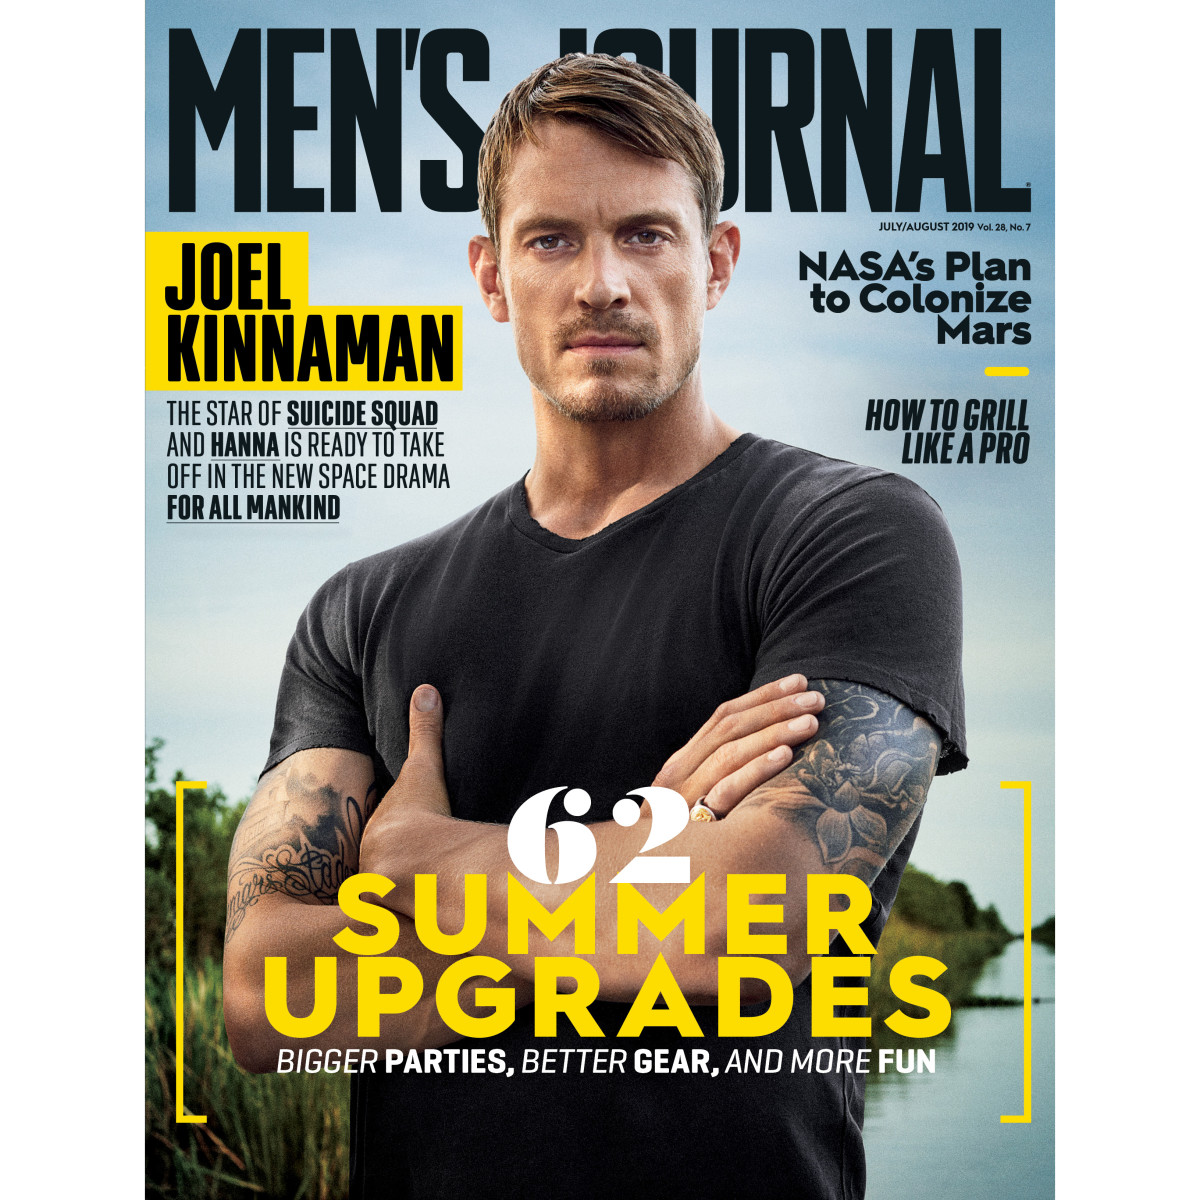 mens-journal-cover-july-august-cover